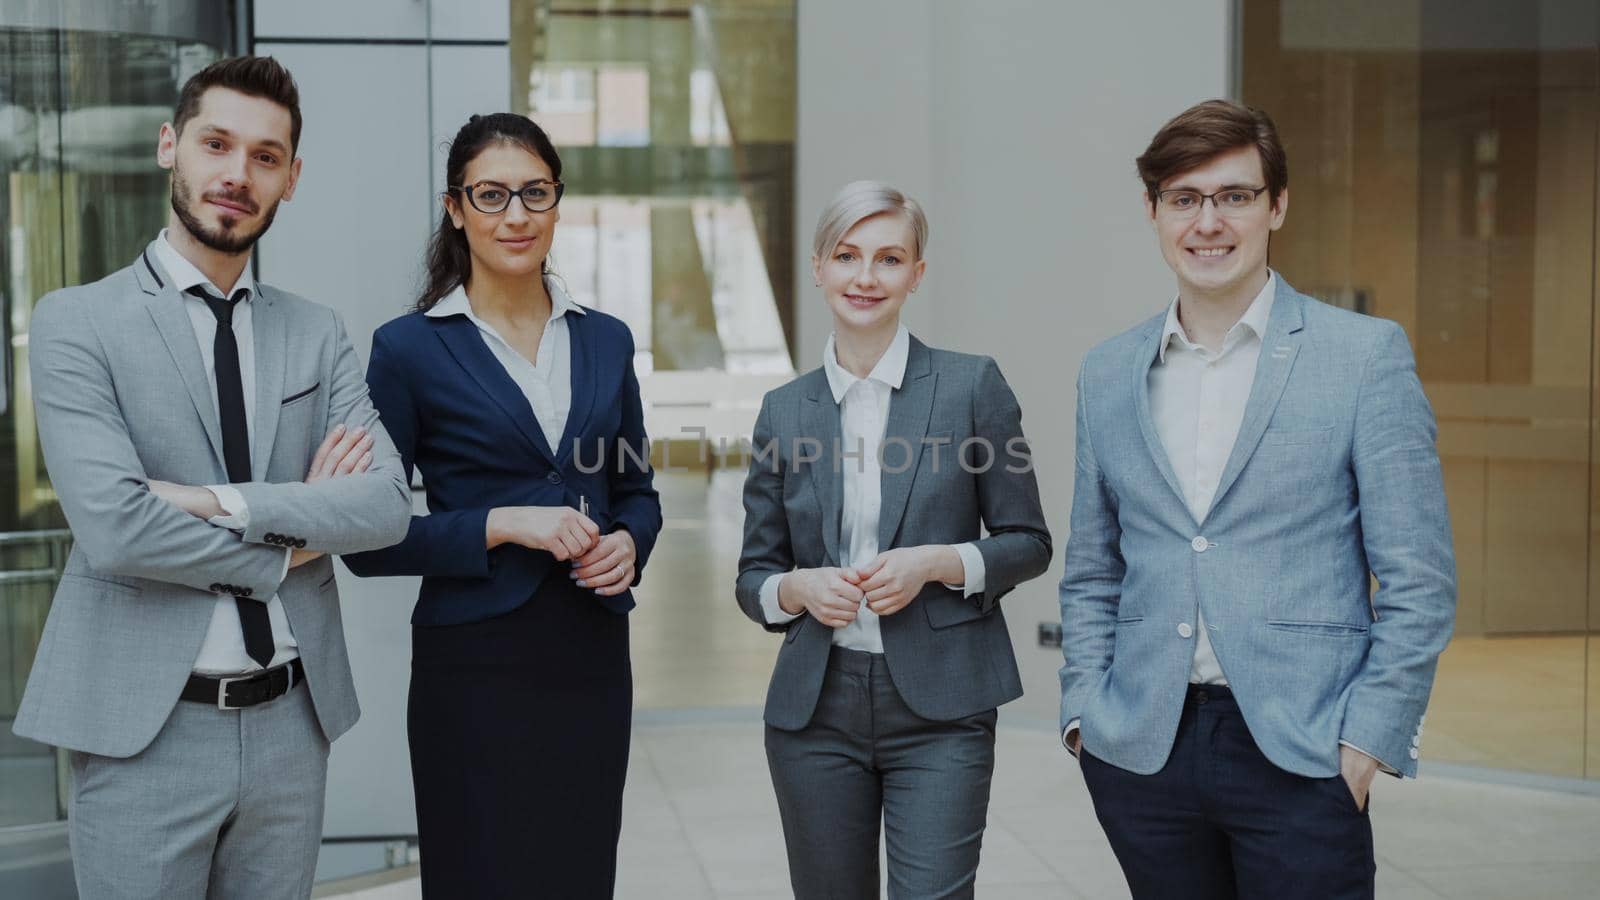 Portrait of group of business people smiling in modern office indoors. Team of businessmen and businesswomen standing together